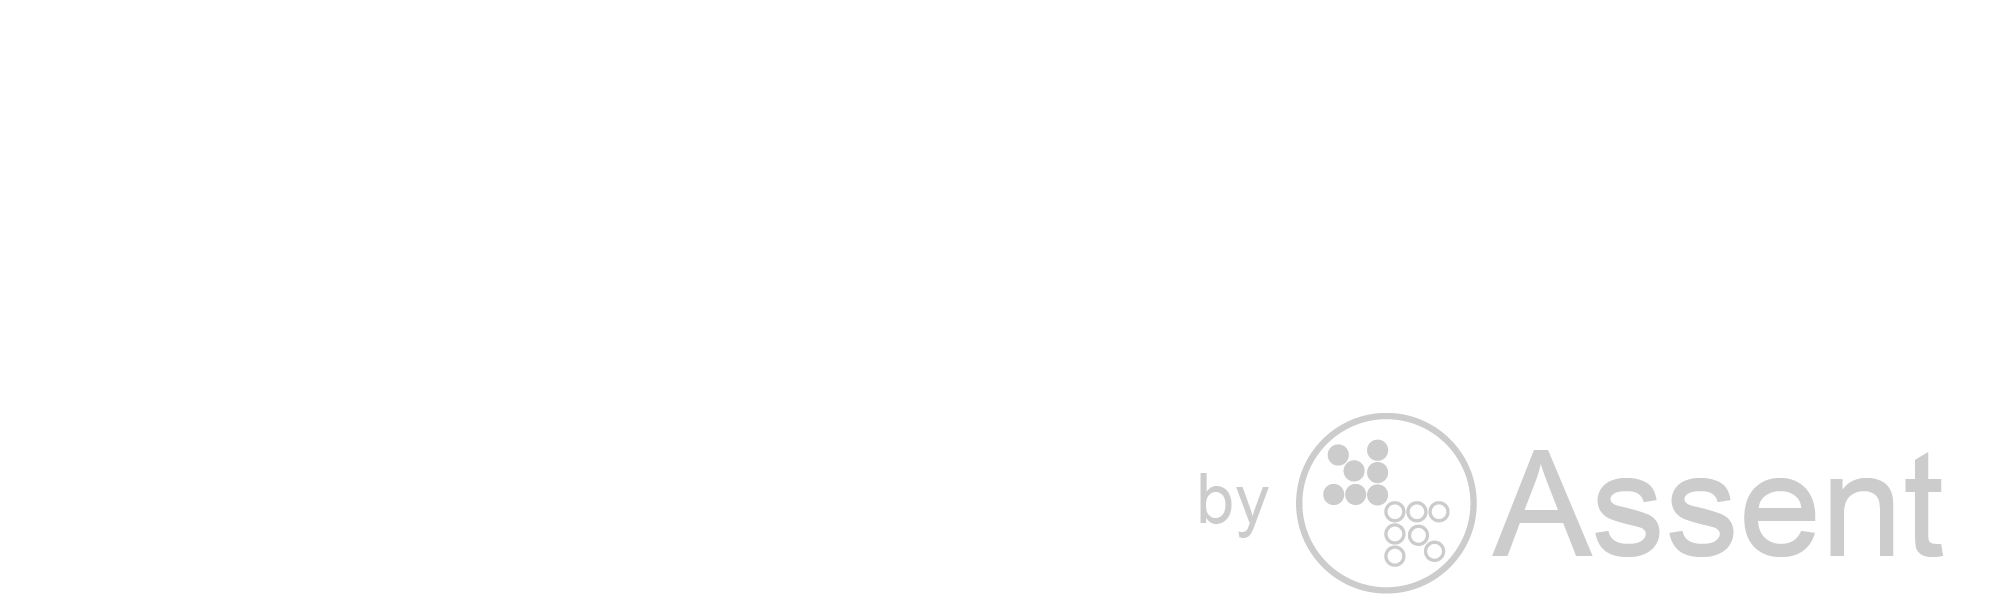 Resilify io by Assent